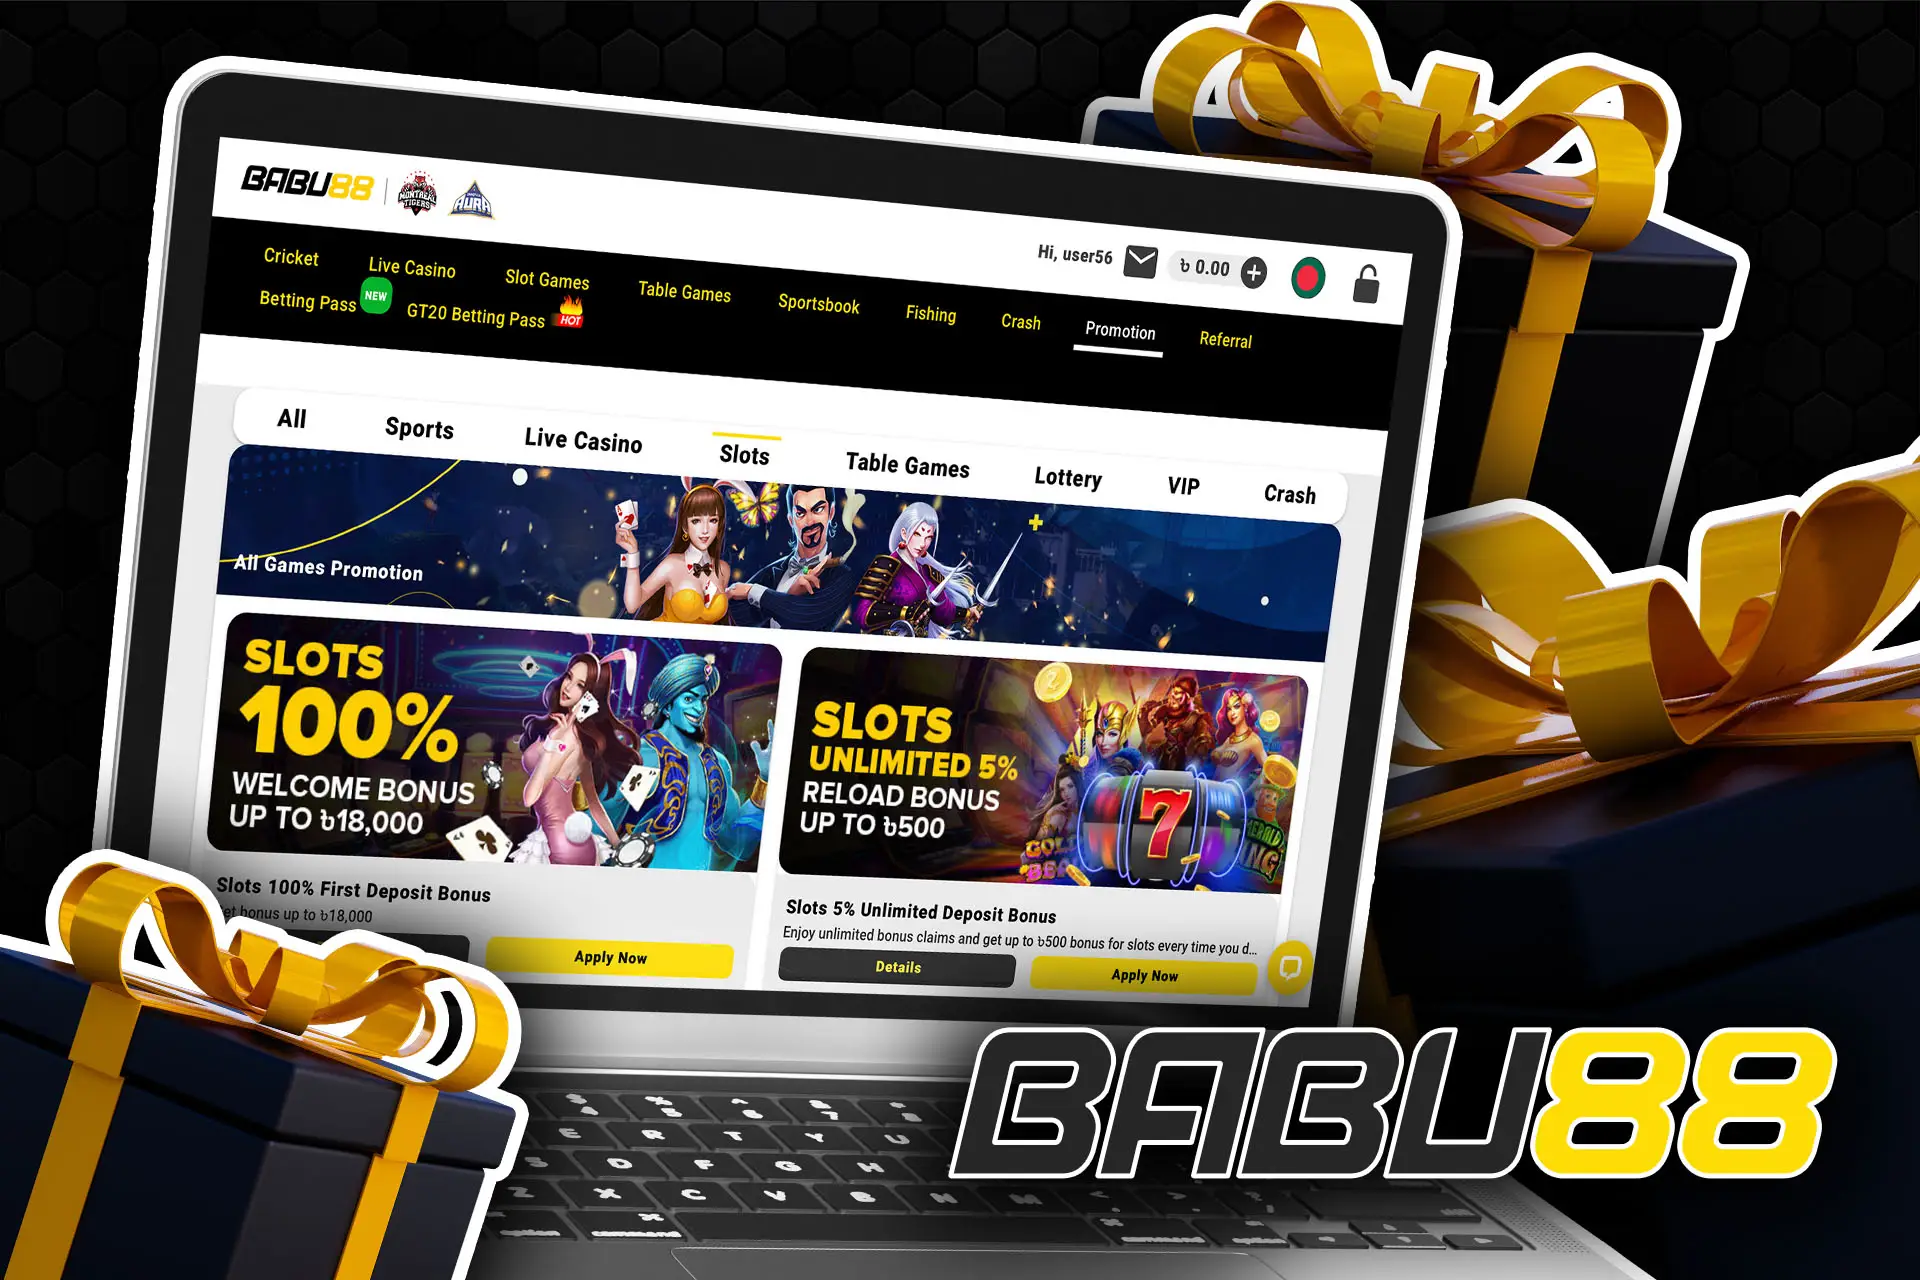 Get up to 18,000 BDT as a welcome bonus on slots.